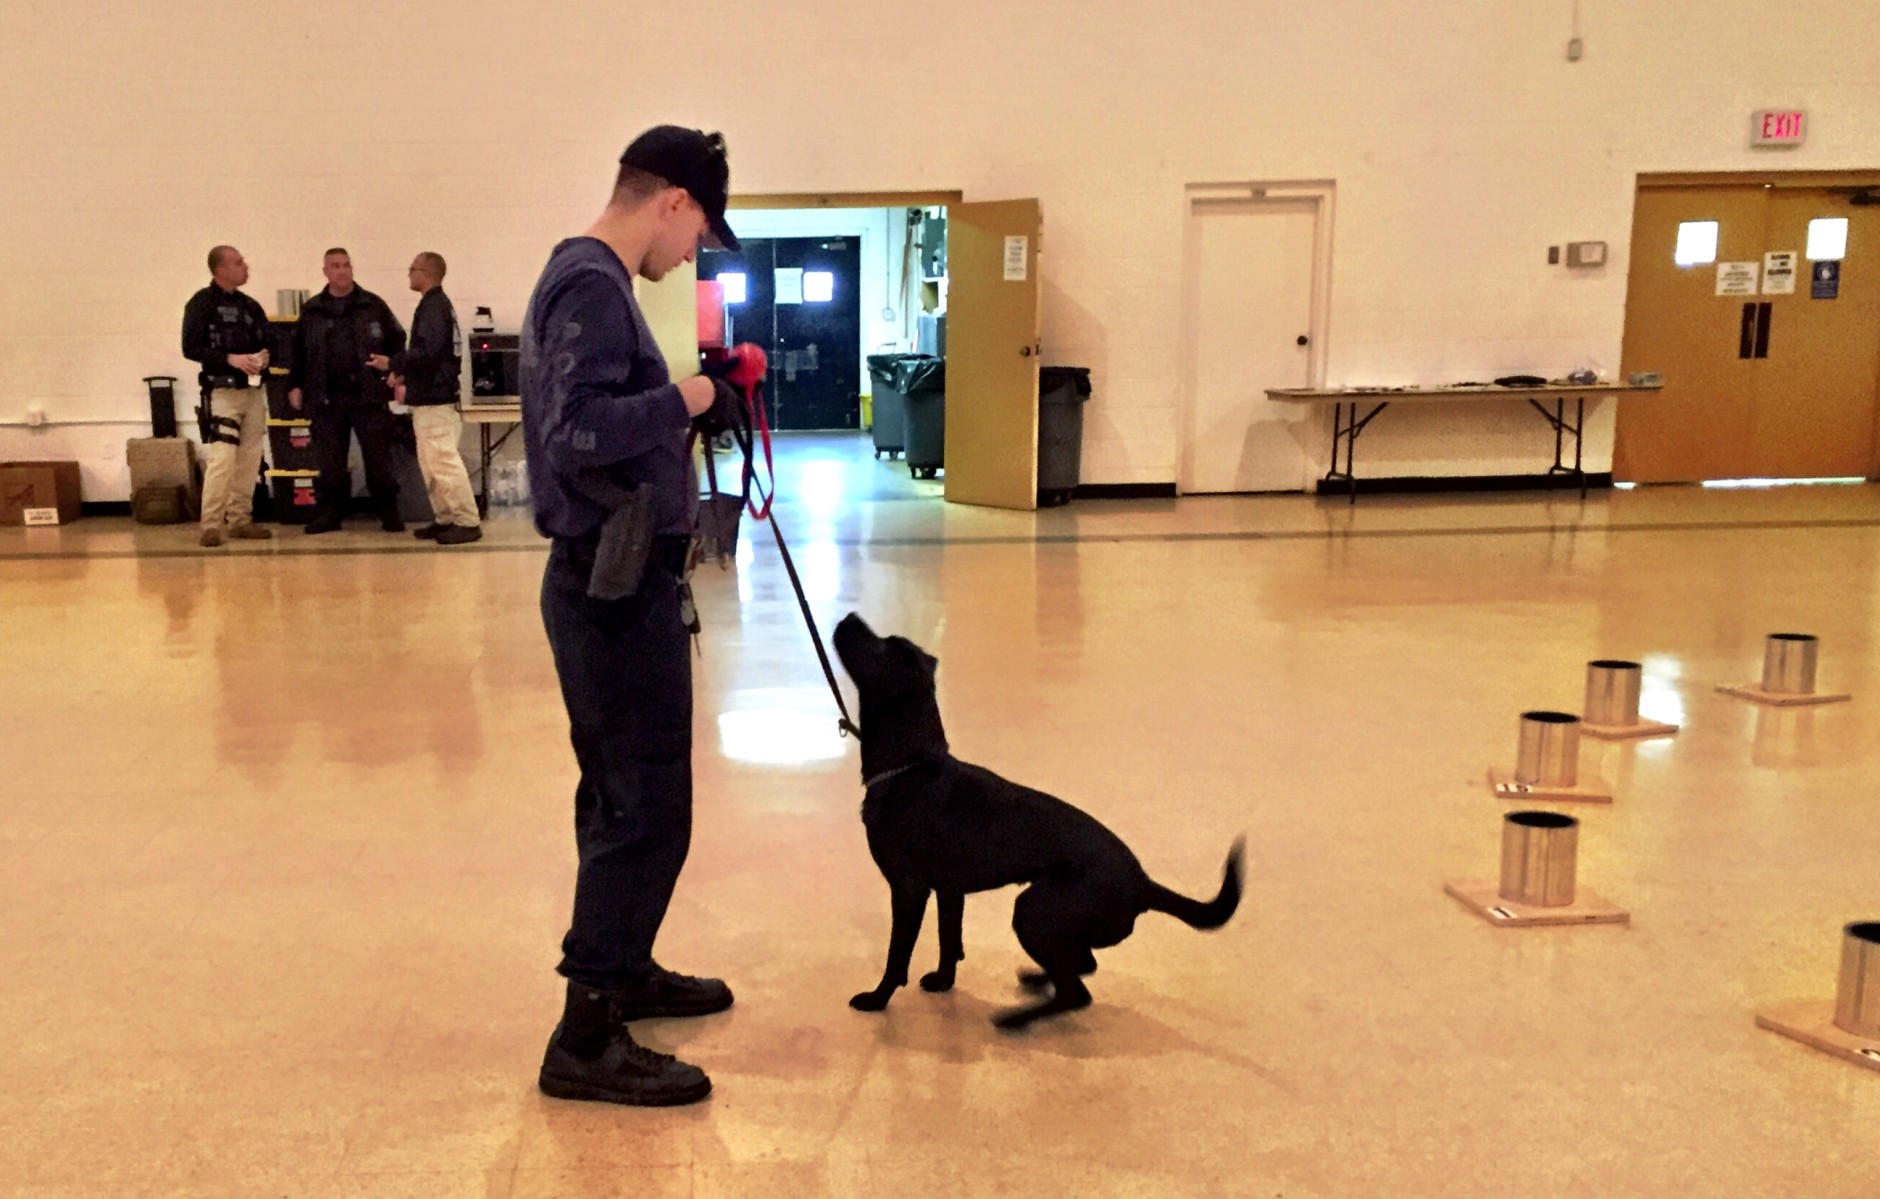 Bomb sniffing teams from almost 40 agencies took part in ATF's National Odor Recognition Testing in an auditorium in Fairfax (WTOP/Neal Augenstein)